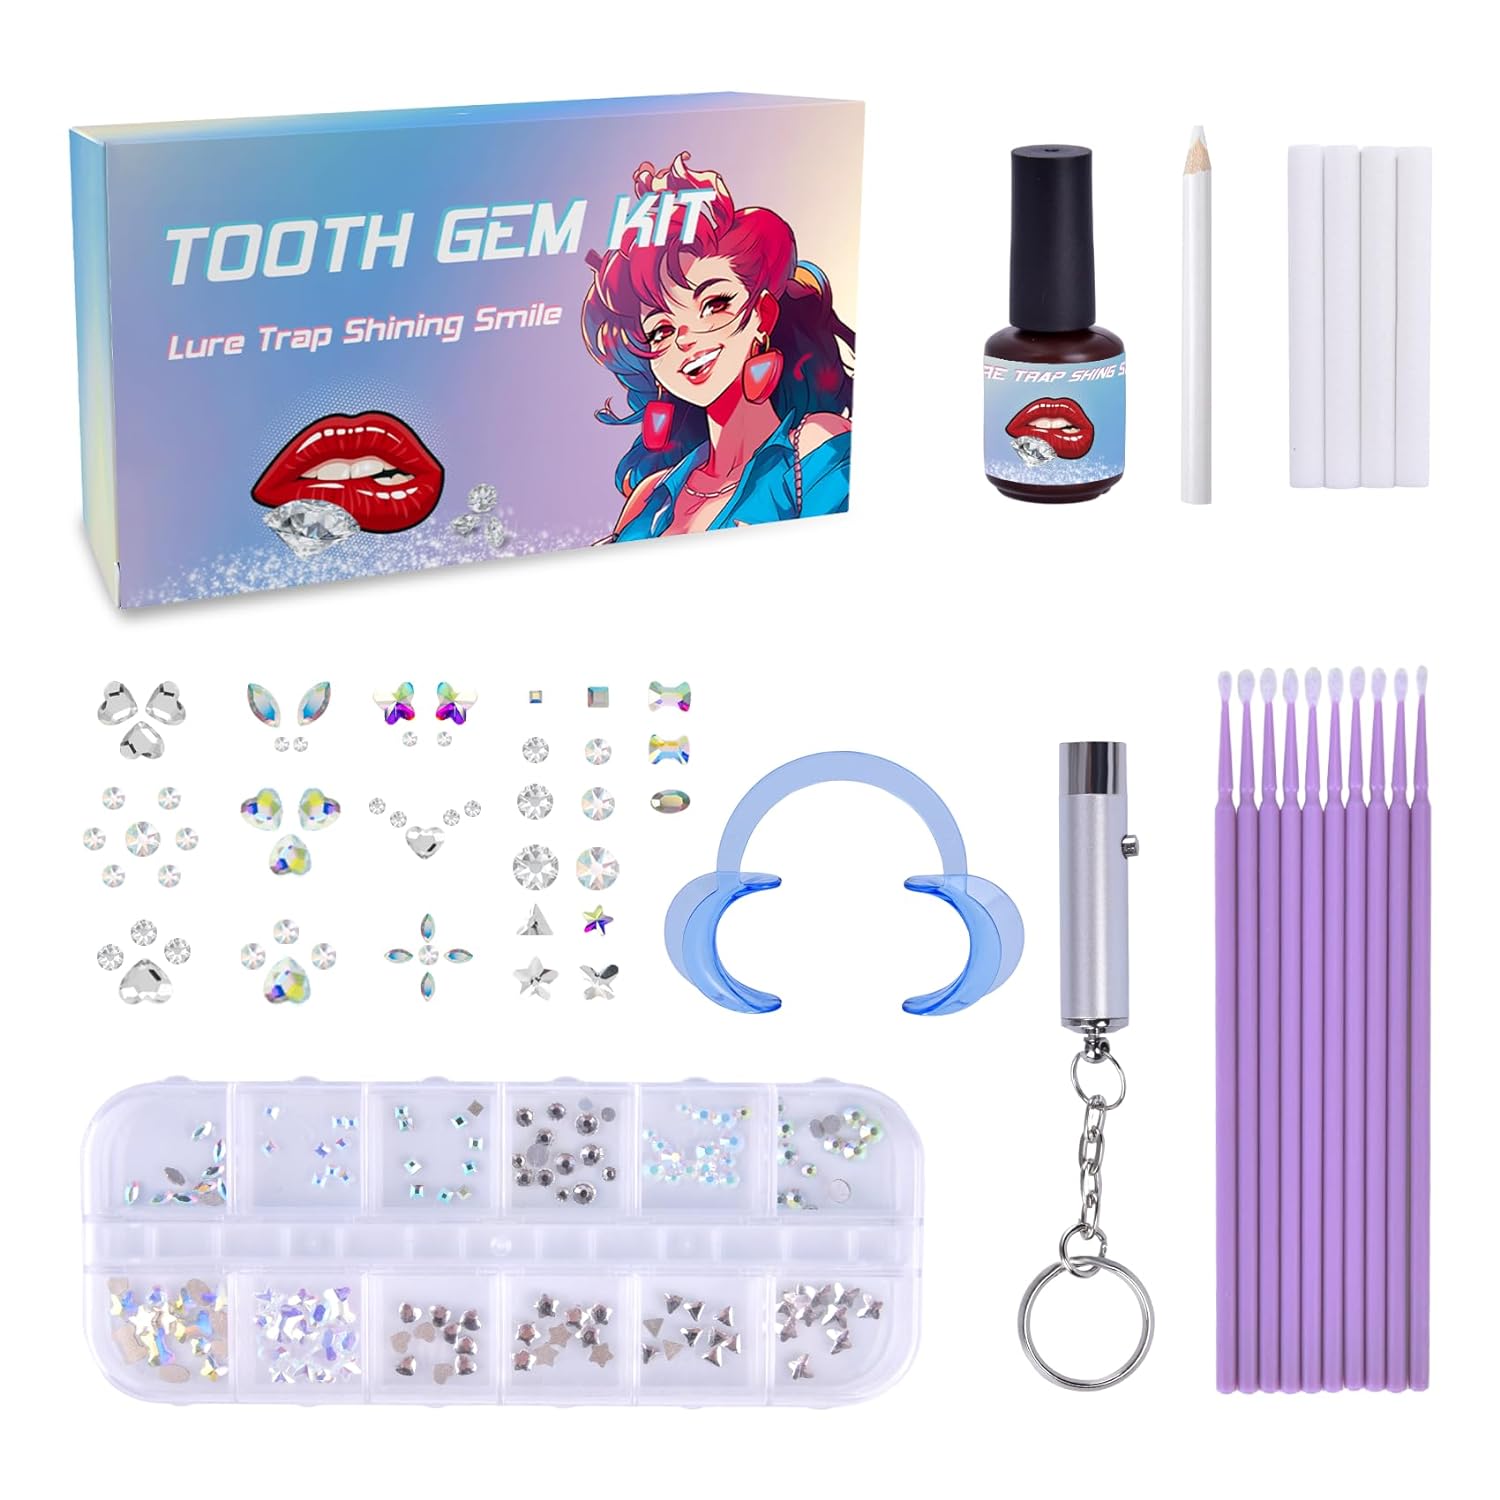  Luretrap DIY Tooth gem kit with GIue,30 Pieces Crystals,Crystal  GIue Jewelry Starter kit